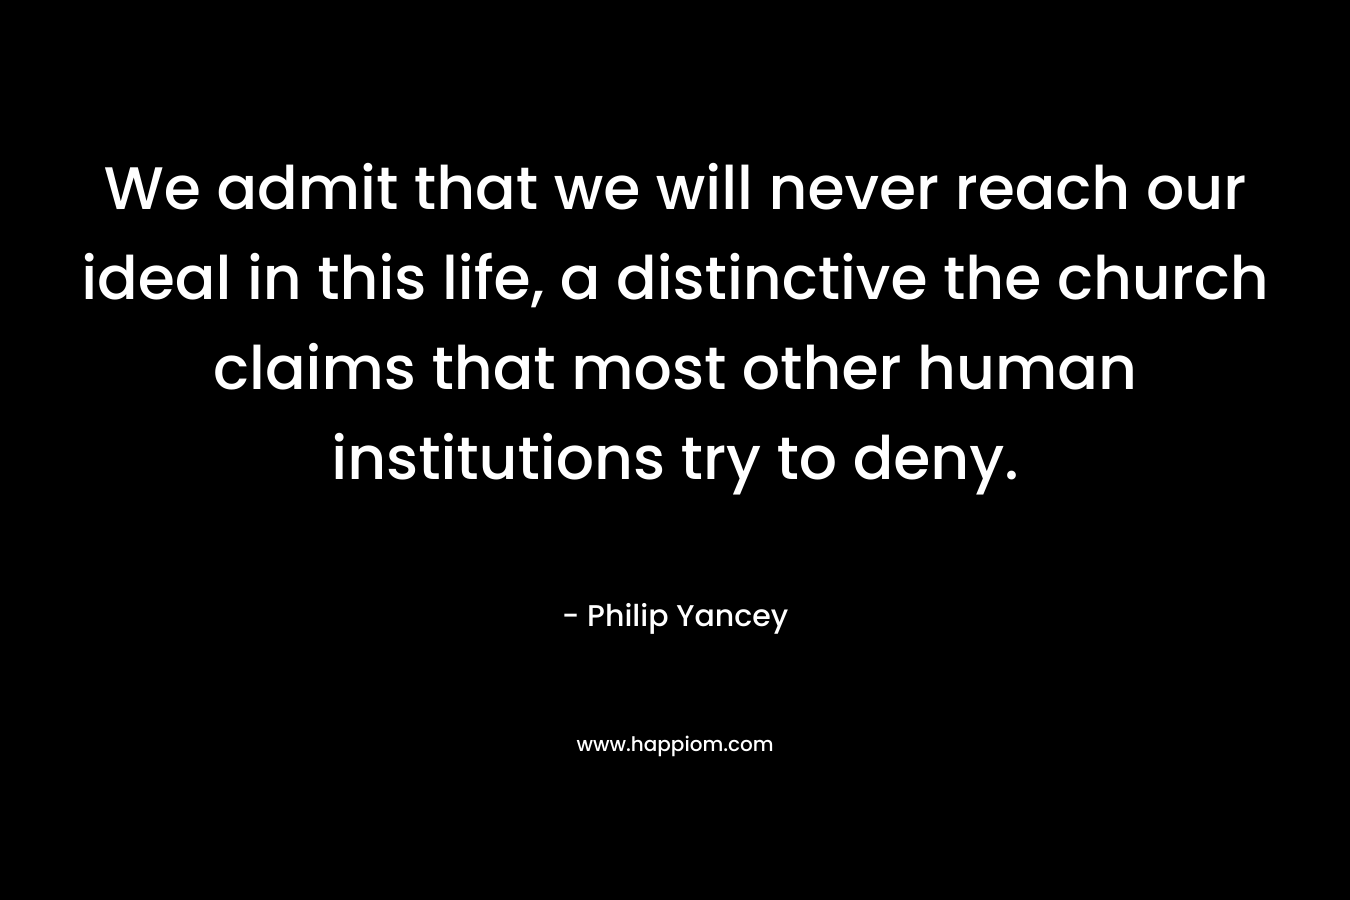 We admit that we will never reach our ideal in this life, a distinctive the church claims that most other human institutions try to deny. – Philip Yancey